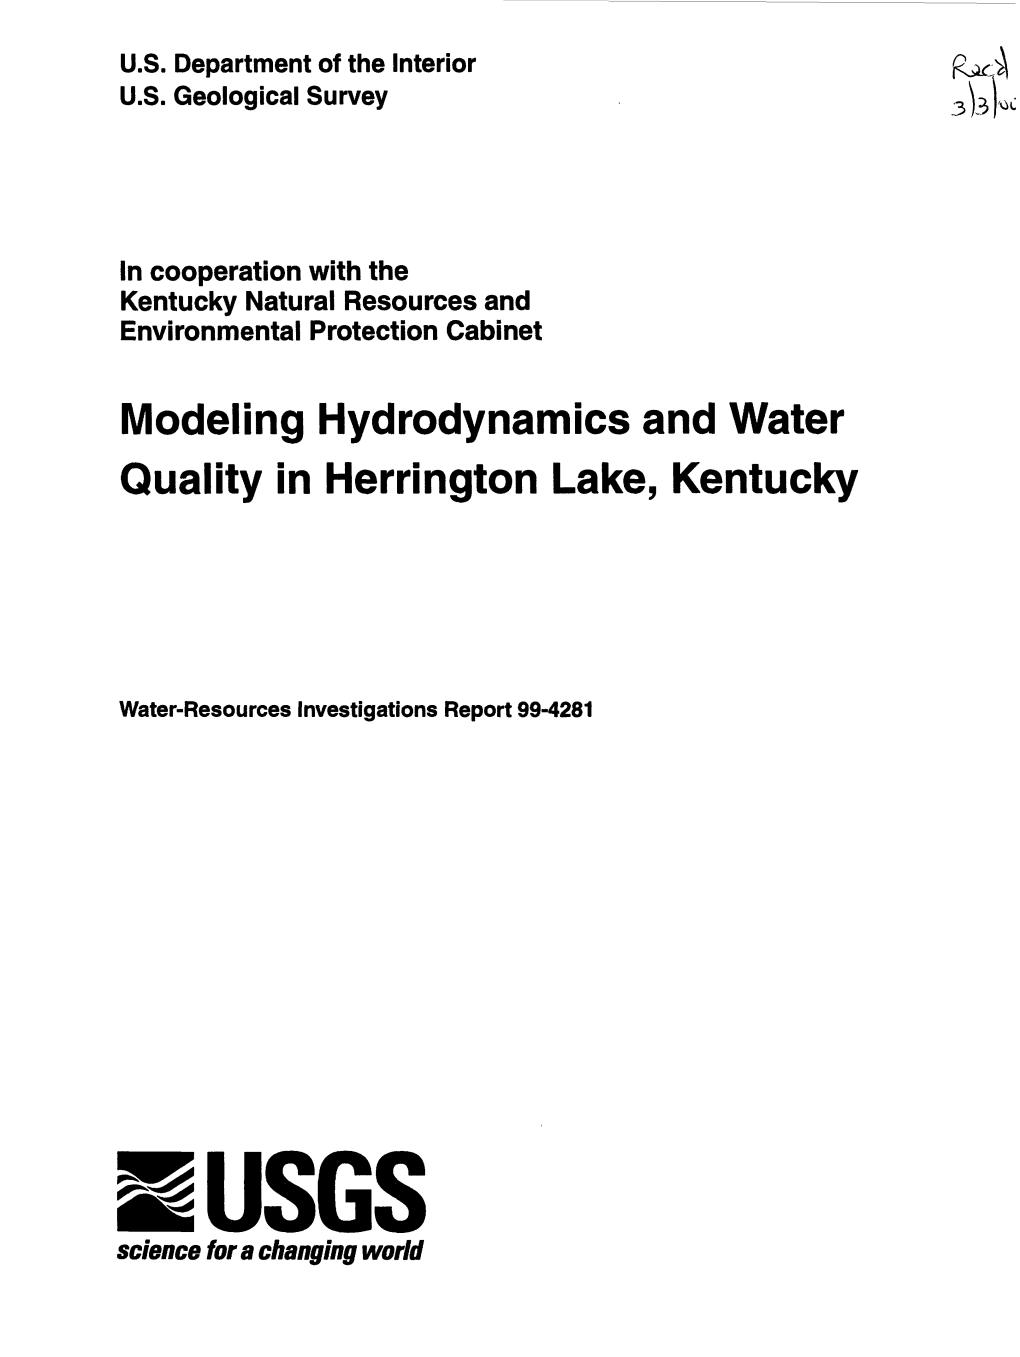 Modeling Hydrodynamics and Water Quality in Herrington Lake, Kentucky